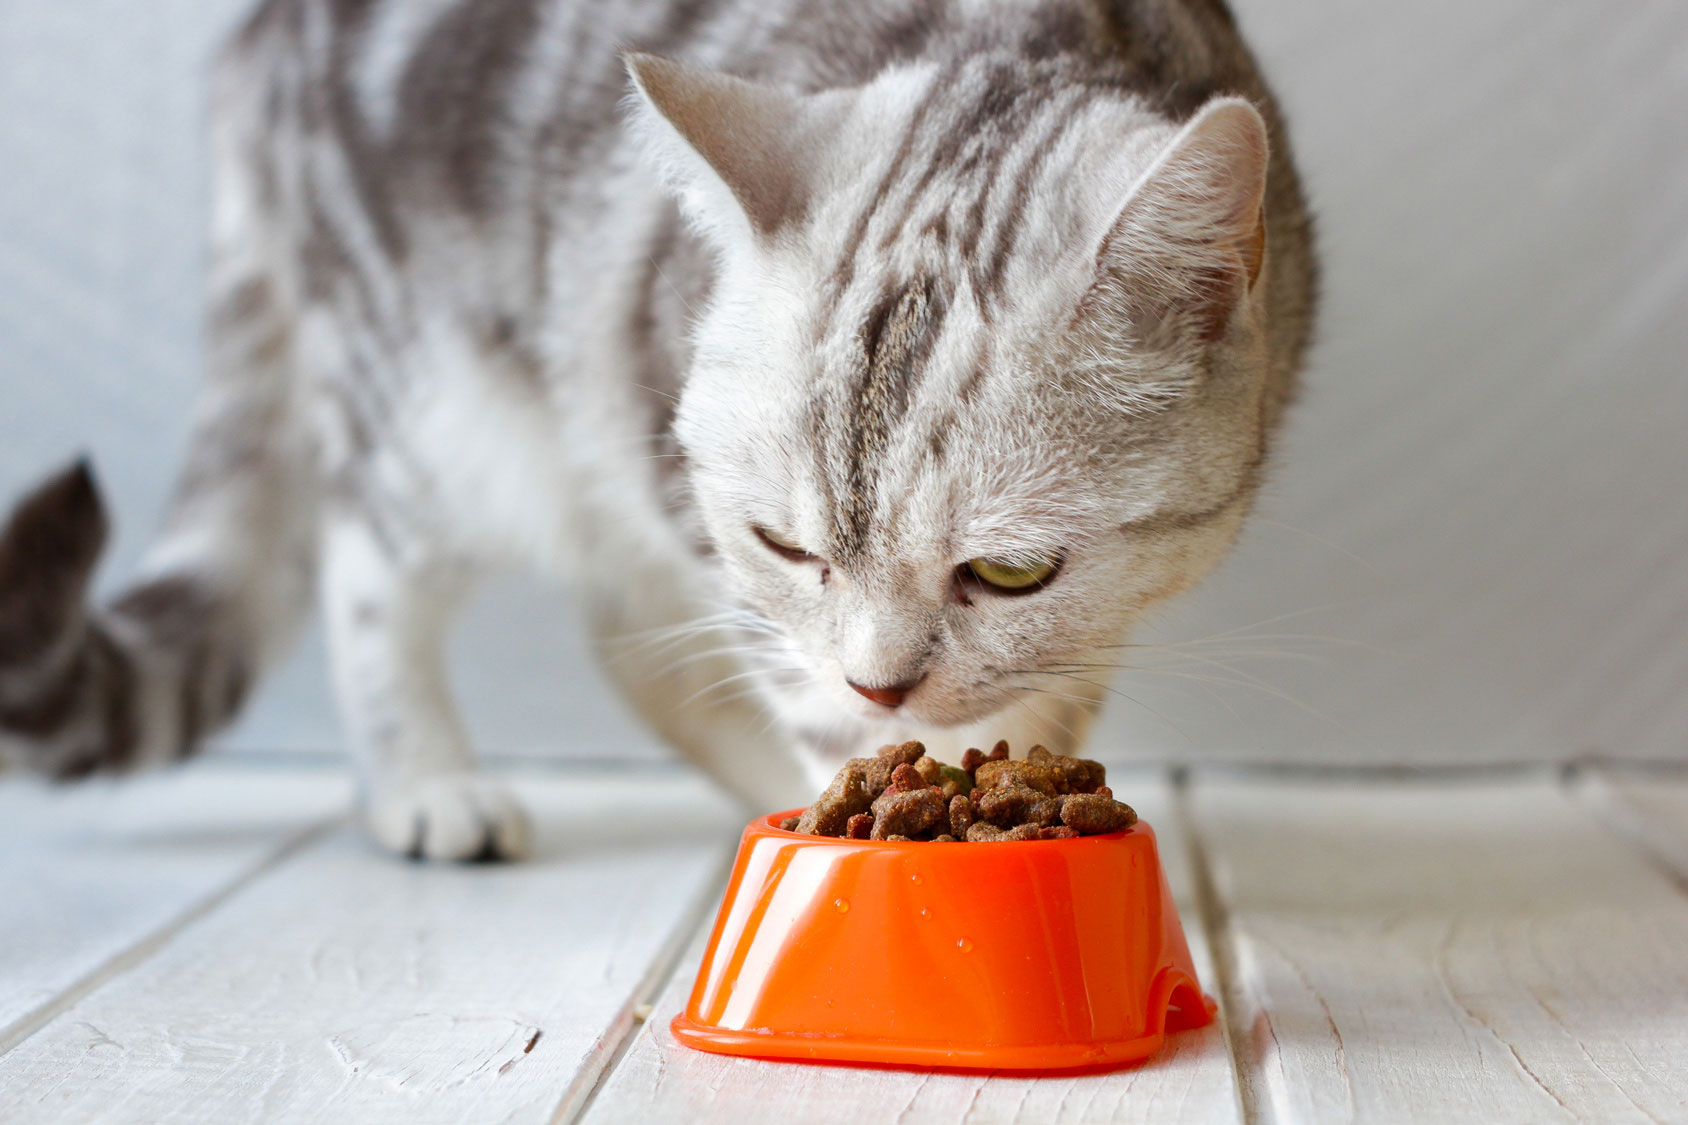 cat eating from food bowl